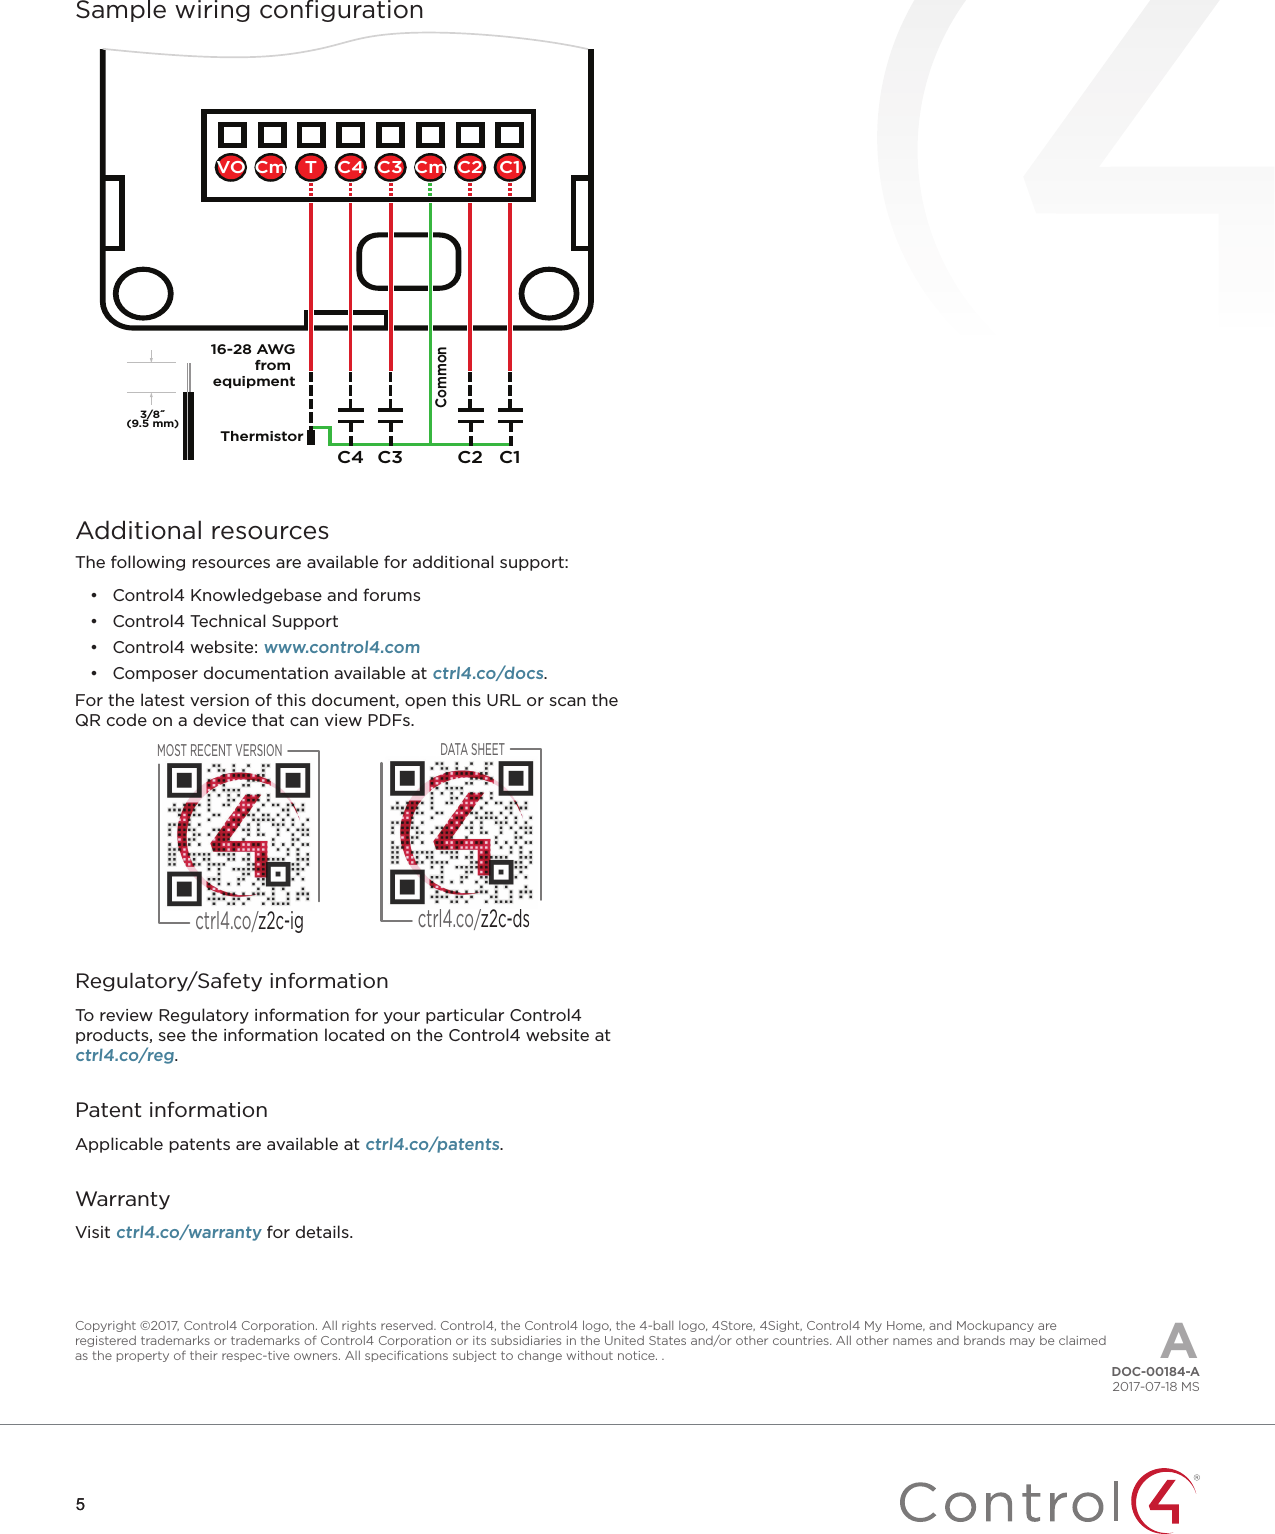 55Sample wiring conﬁguration16-28 AWGfrom equipmentC1C2C3C43/8˝(9.5 mm)ThermistorCommonT C1C2CmC3C4VO CmAdditional resourcesThe following resources are available for additional support:•  Control4 Knowledgebase and forums•  Control4 Technical Support•  Control4 website: www.control4.com•  Composer documentation available at ctrl4.co/docs.For the latest version of this document, open this URL or scan the QR code on a device that can view PDFs.DATA SHEETctrl4.co/z2c-dsMOST RECENT VERSIONctrl4.co/z2c-igRegulatory/Safety informationTo review Regulatory information for your particular Control4 products, see the information located on the Control4 website at ctrl4.co/reg.Patent informationApplicable patents are available at ctrl4.co/patents.WarrantyVisit ctrl4.co/warranty for details.Copyright ©2017, Control4 Corporation. All rights reserved. Control4, the Control4 logo, the 4-ball logo, 4Store, 4Sight, Control4 My Home, and Mockupancy are registered trademarks or trademarks of Control4 Corporation or its subsidiaries in the United States and/or other countries. All other names and brands may be claimed as the property of their respec-tive owners. All speciﬁcations subject to change without notice. . ADOC-00184-A2017-07-18 MS